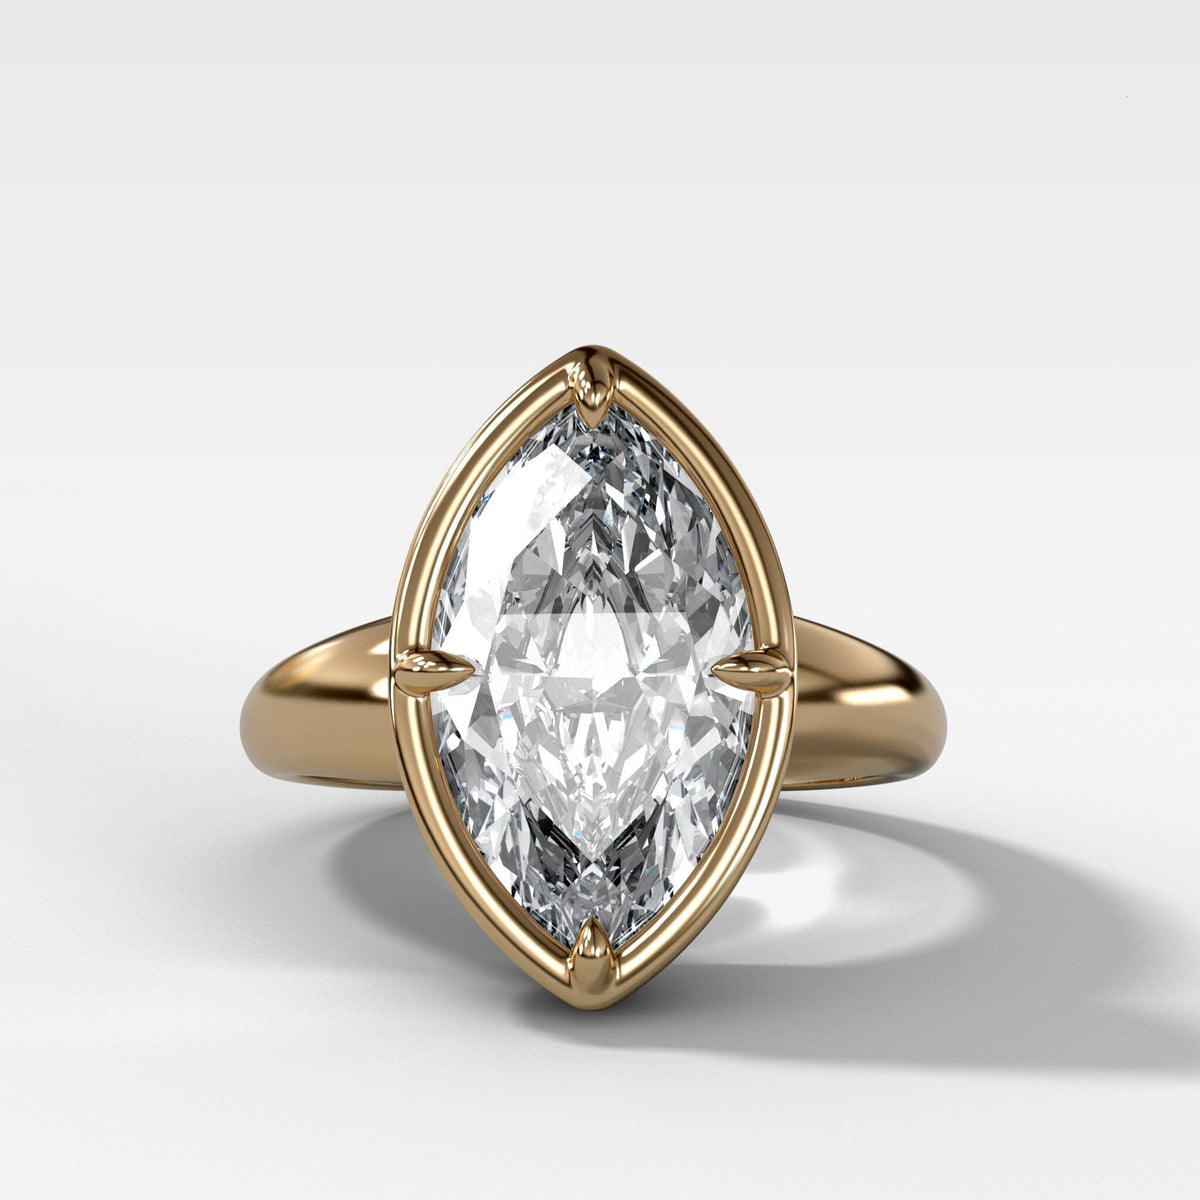 Club Ring Solitaire With a Marquise Cut Engagement Good Stone Inc 